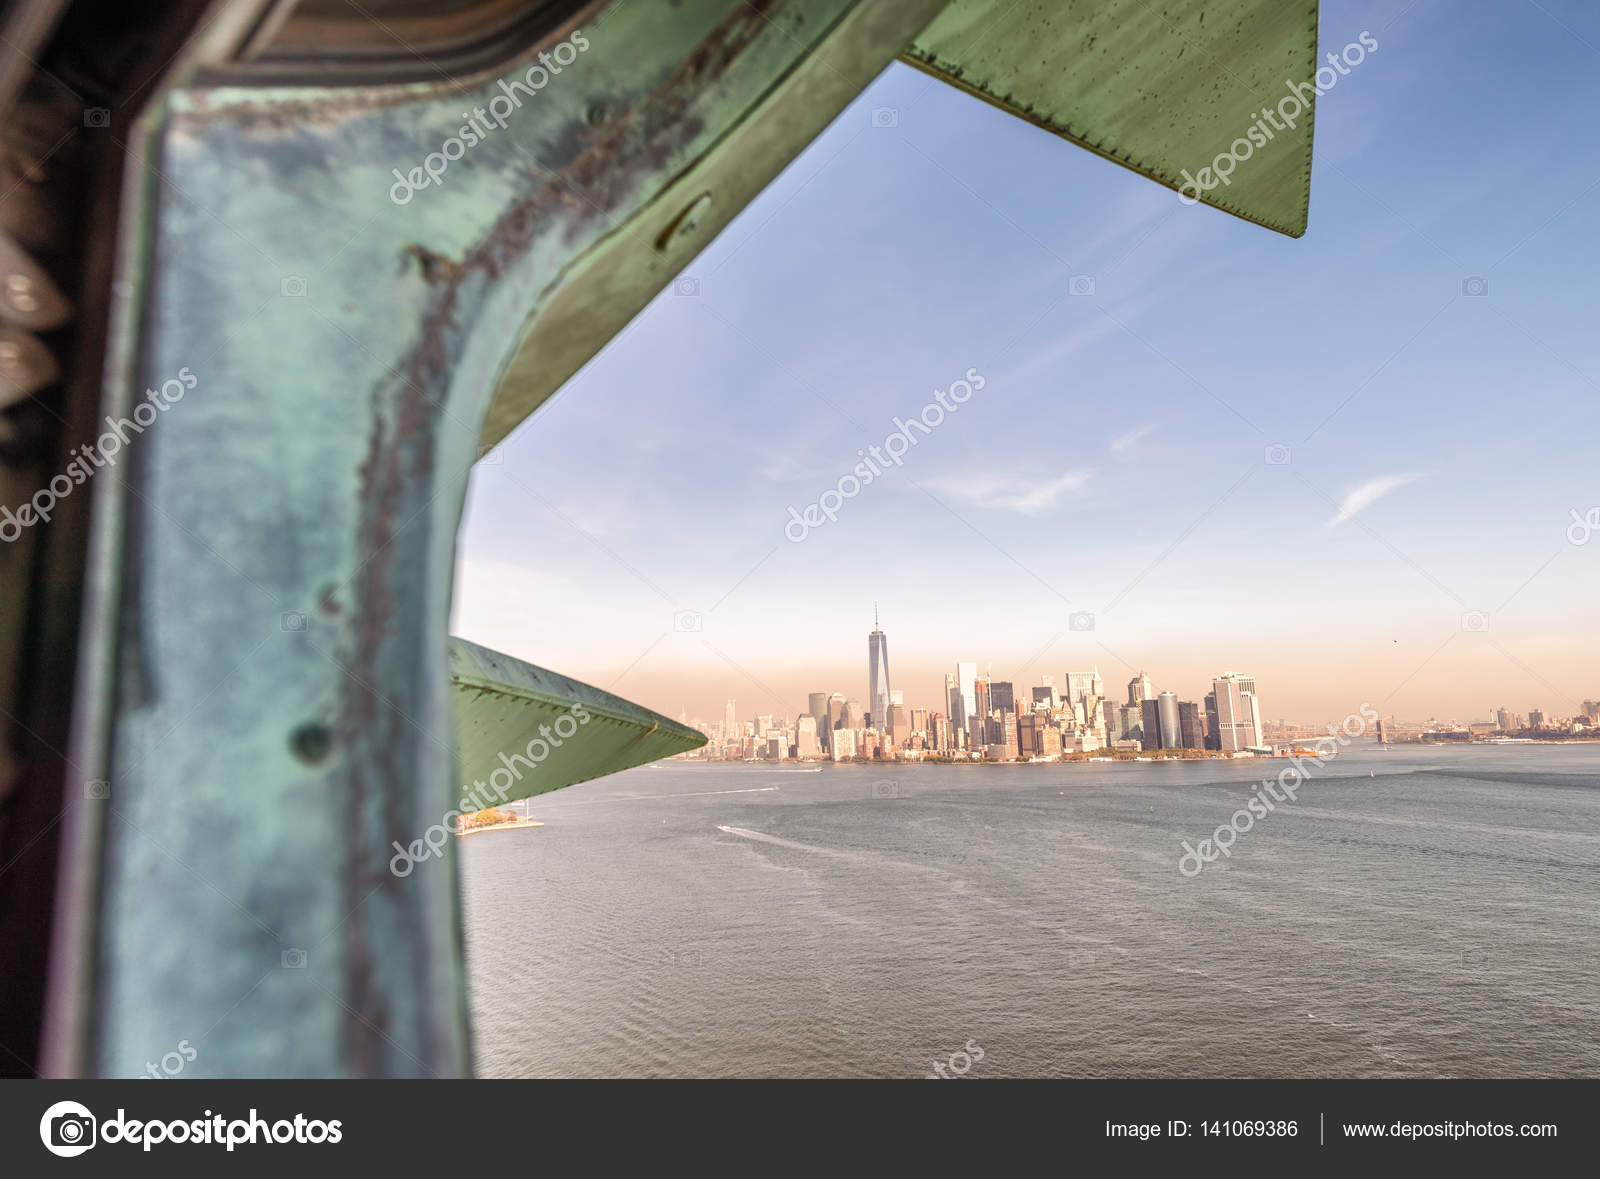 Statue Of Liberty In New York Interior View Stock Photo